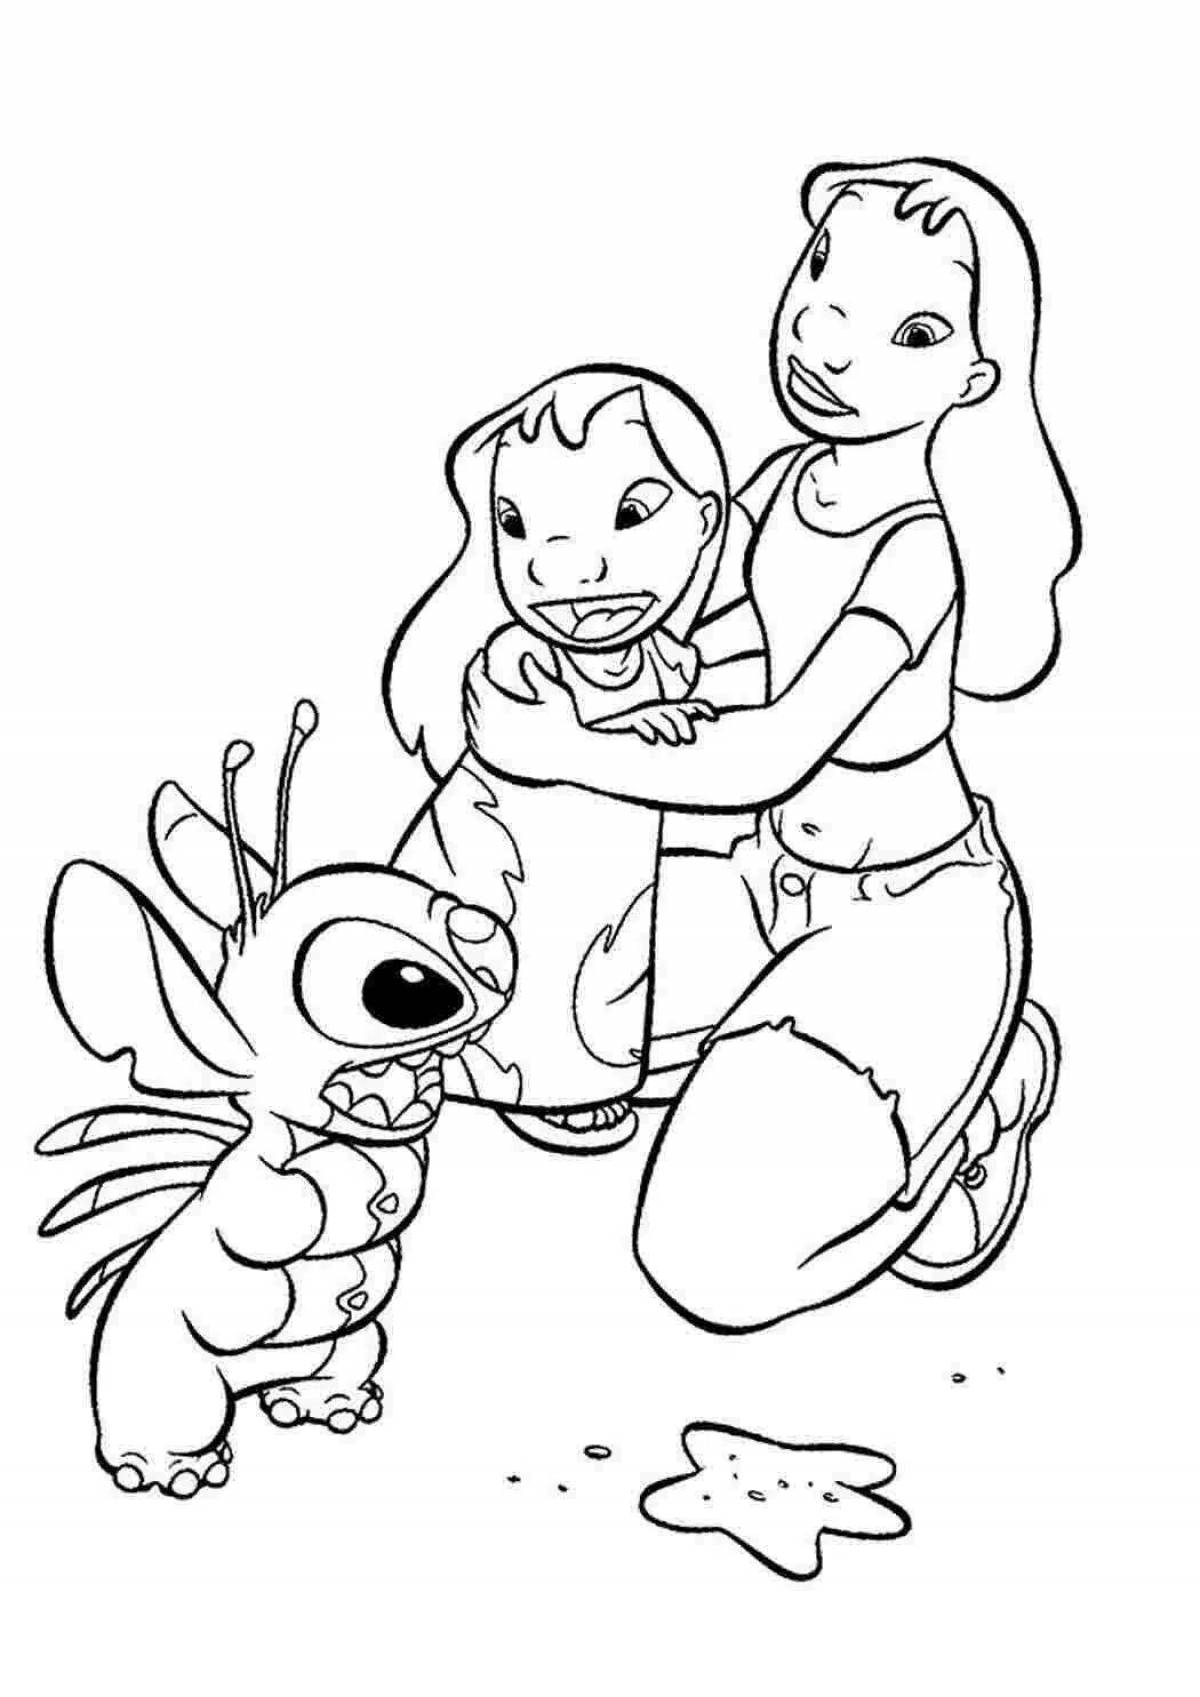 Color-lively nani coloring page